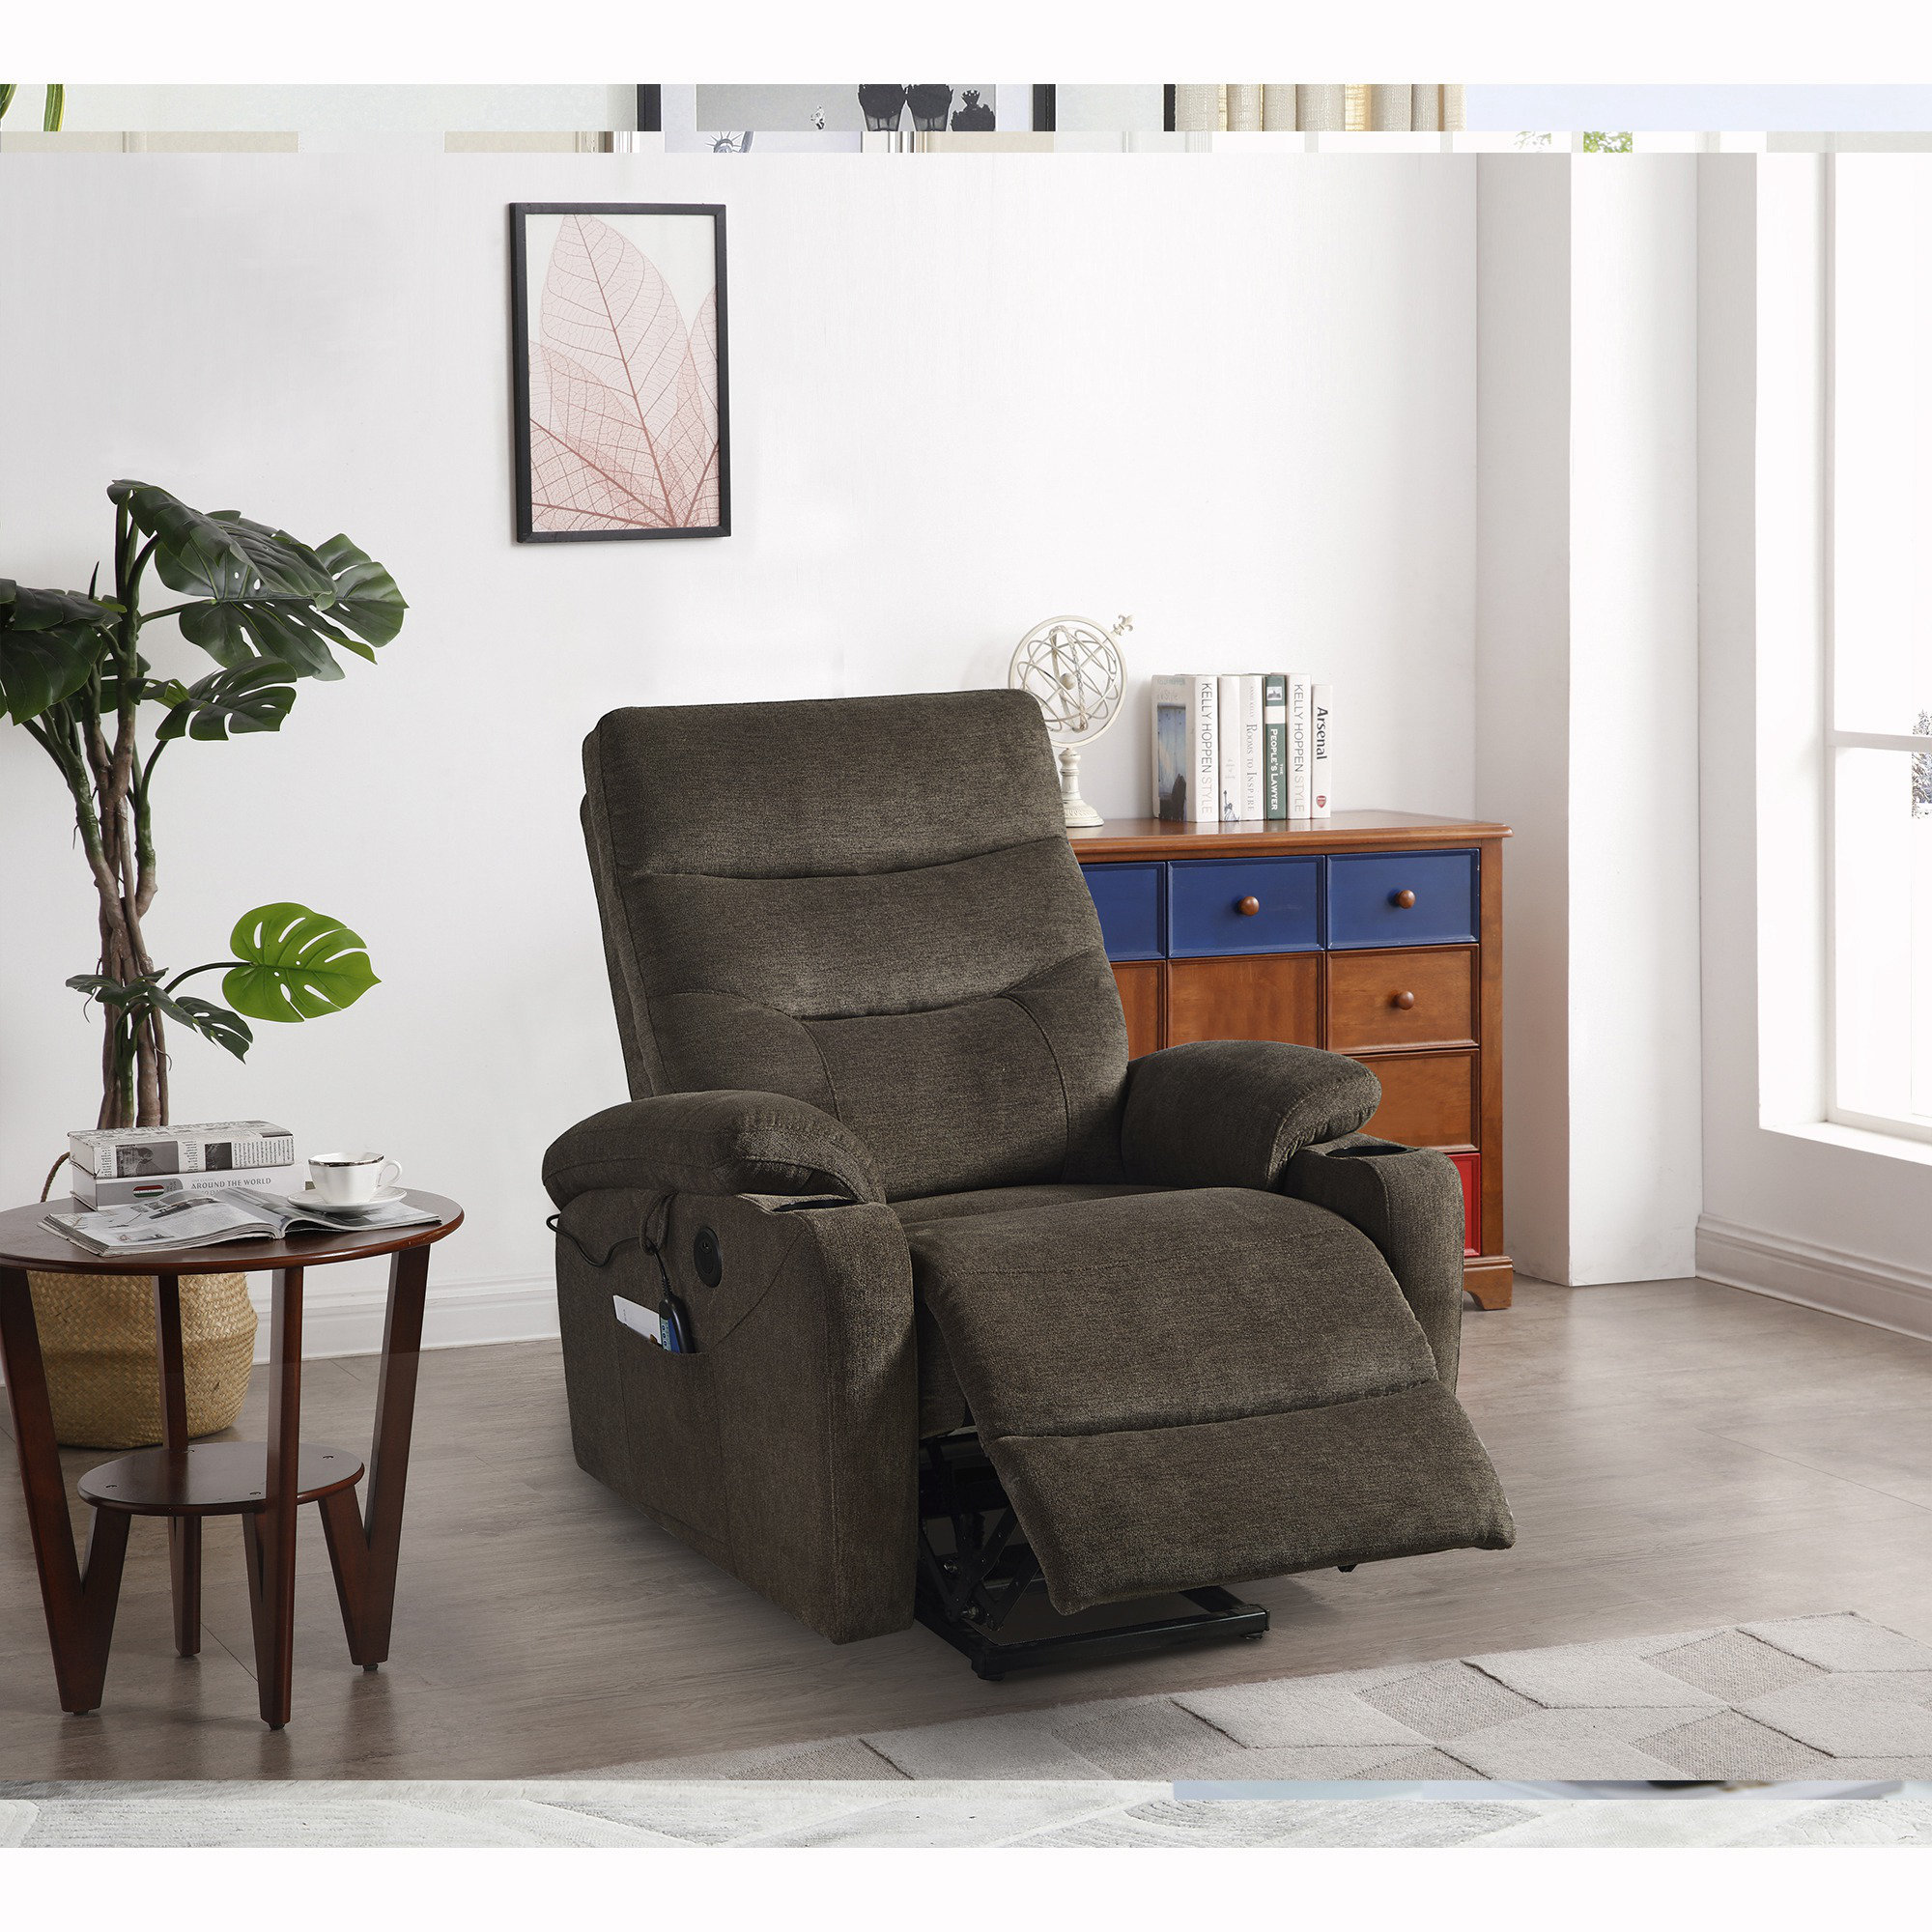 Hamite Power Lift Recliner Chair with Massage and Heat Movable Chair with Wheels, Pillow Included Latitude Run Fabric: Gray Velvet